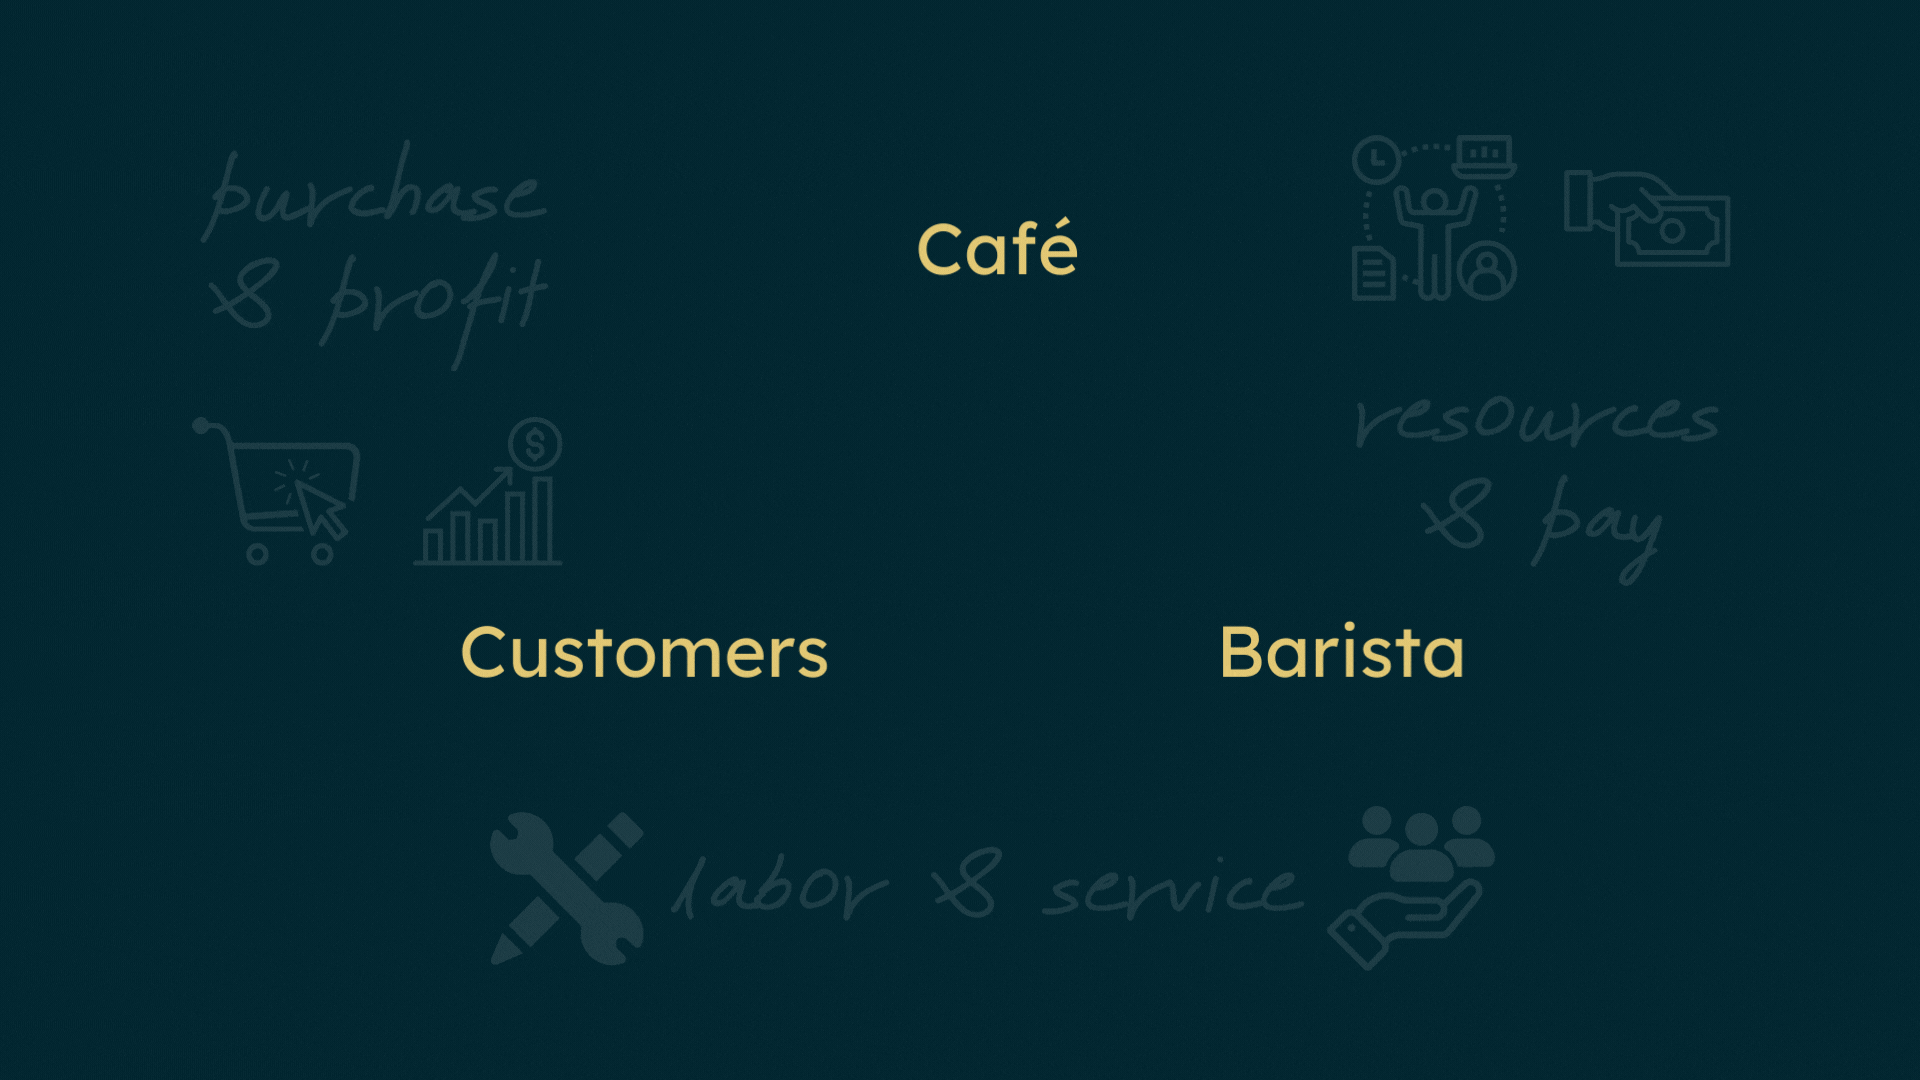 This GIF demonstrates the cycle between the product (Café), the producers (Barista), and the Customer for generating revenue.